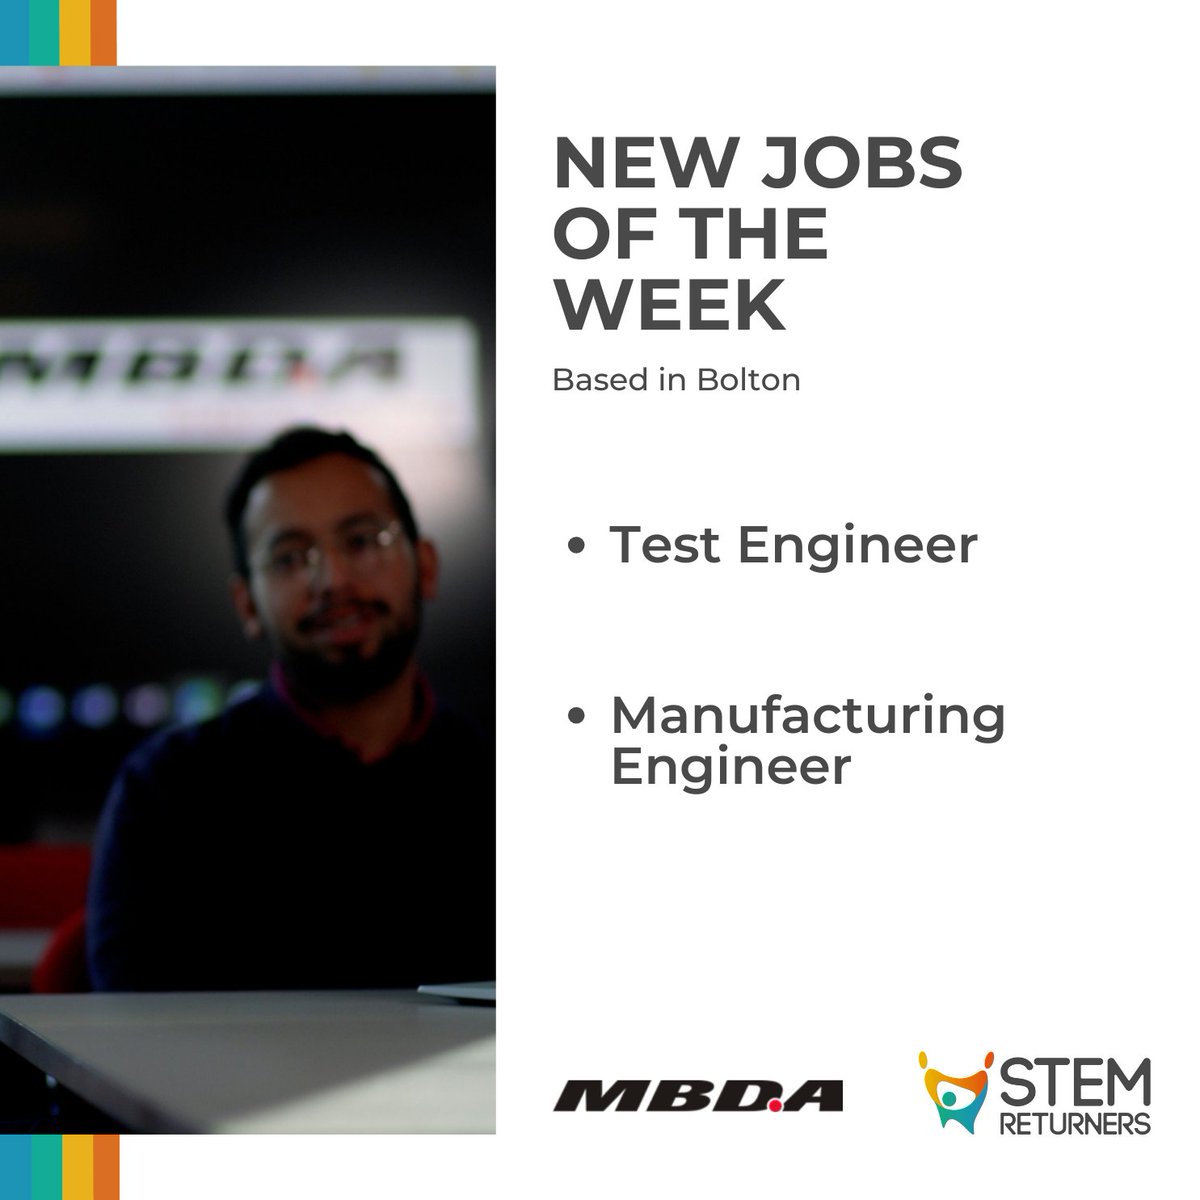 STEM Returners and @MBDAgroup have joined forces to welcome Test Engineers and Manufacturing Engineers back to the industry following a career break. Location: #Bolton Find out more: ow.ly/Iety50QWryb #STEMReturners #ReturntoSTEM #CareerBreak #MBDA